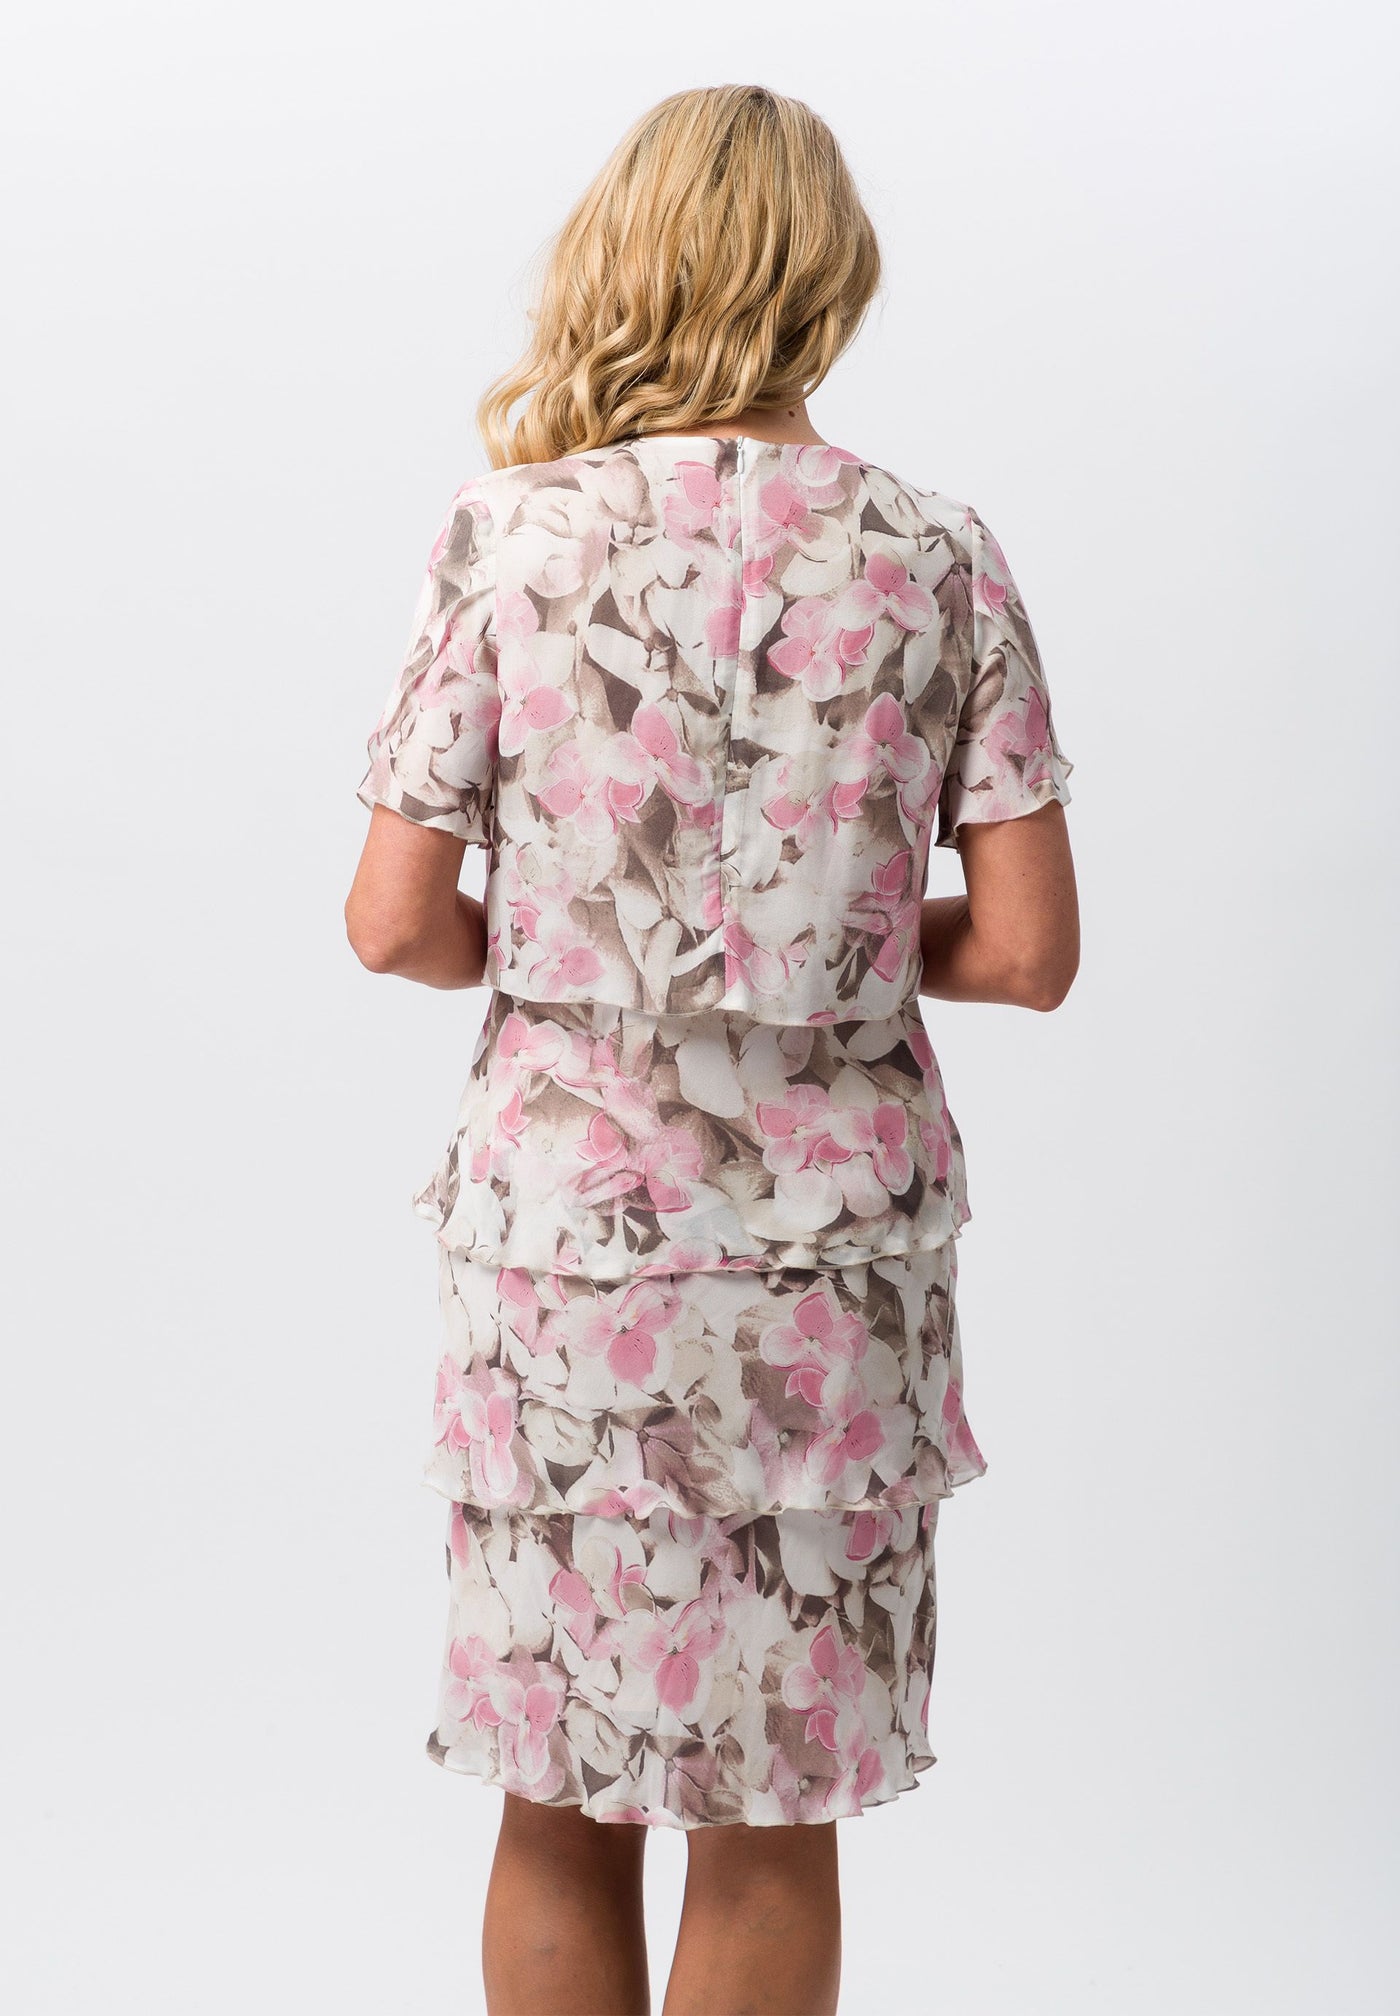 Cream & Beige Layered Dress with Pink Floral Pattern